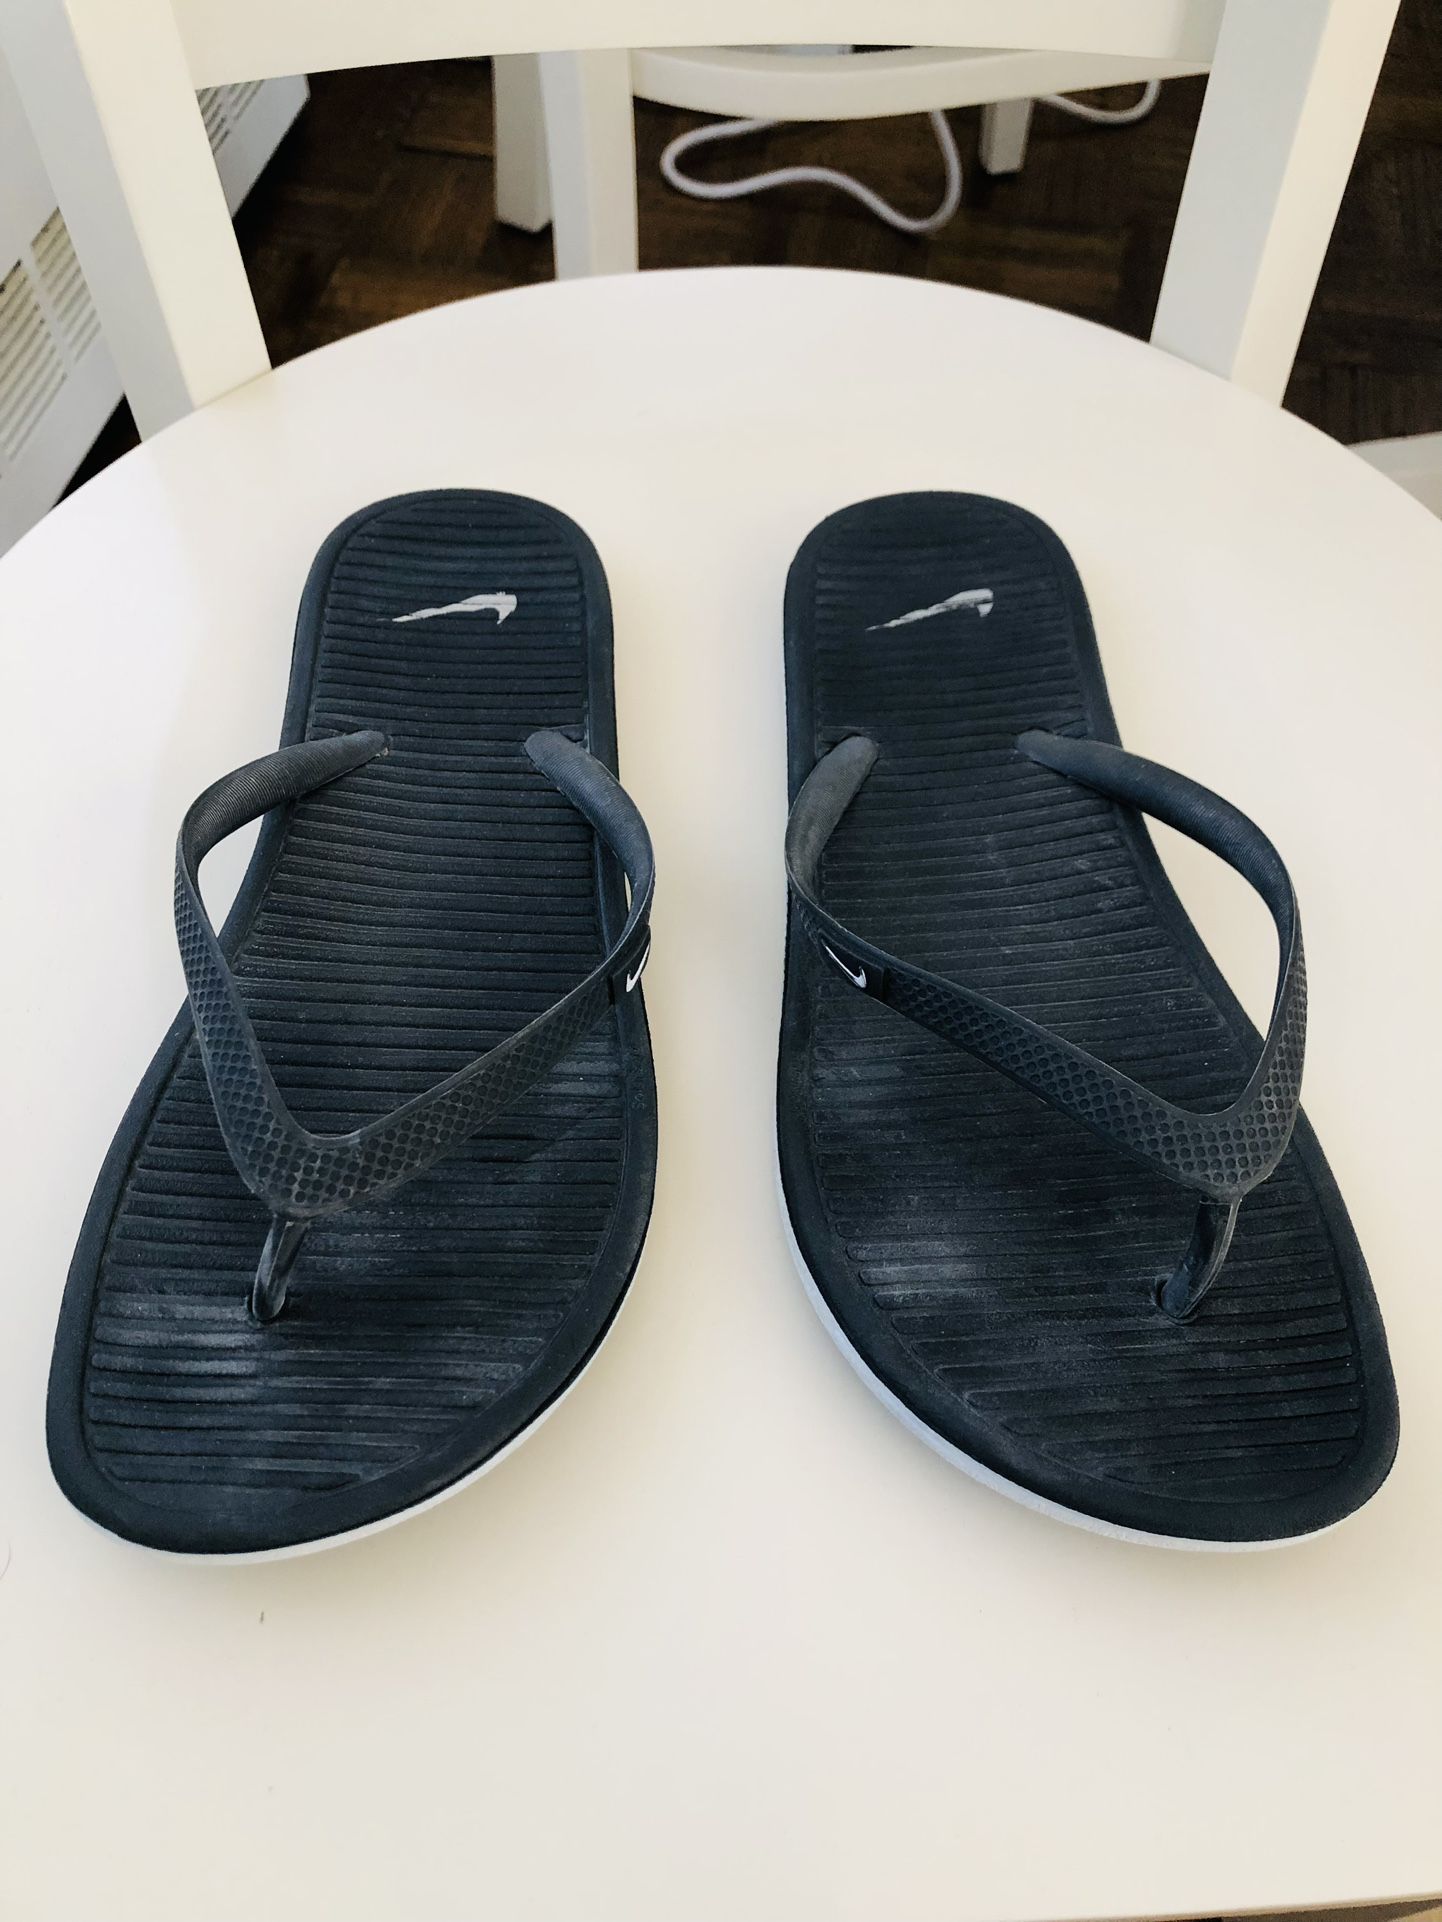 Guau Privilegio Marca comercial Women's Nike Thong Slip-on Flip Flops Navy Blue Size 9W, Used but NICE for  Sale in New York, NY - OfferUp